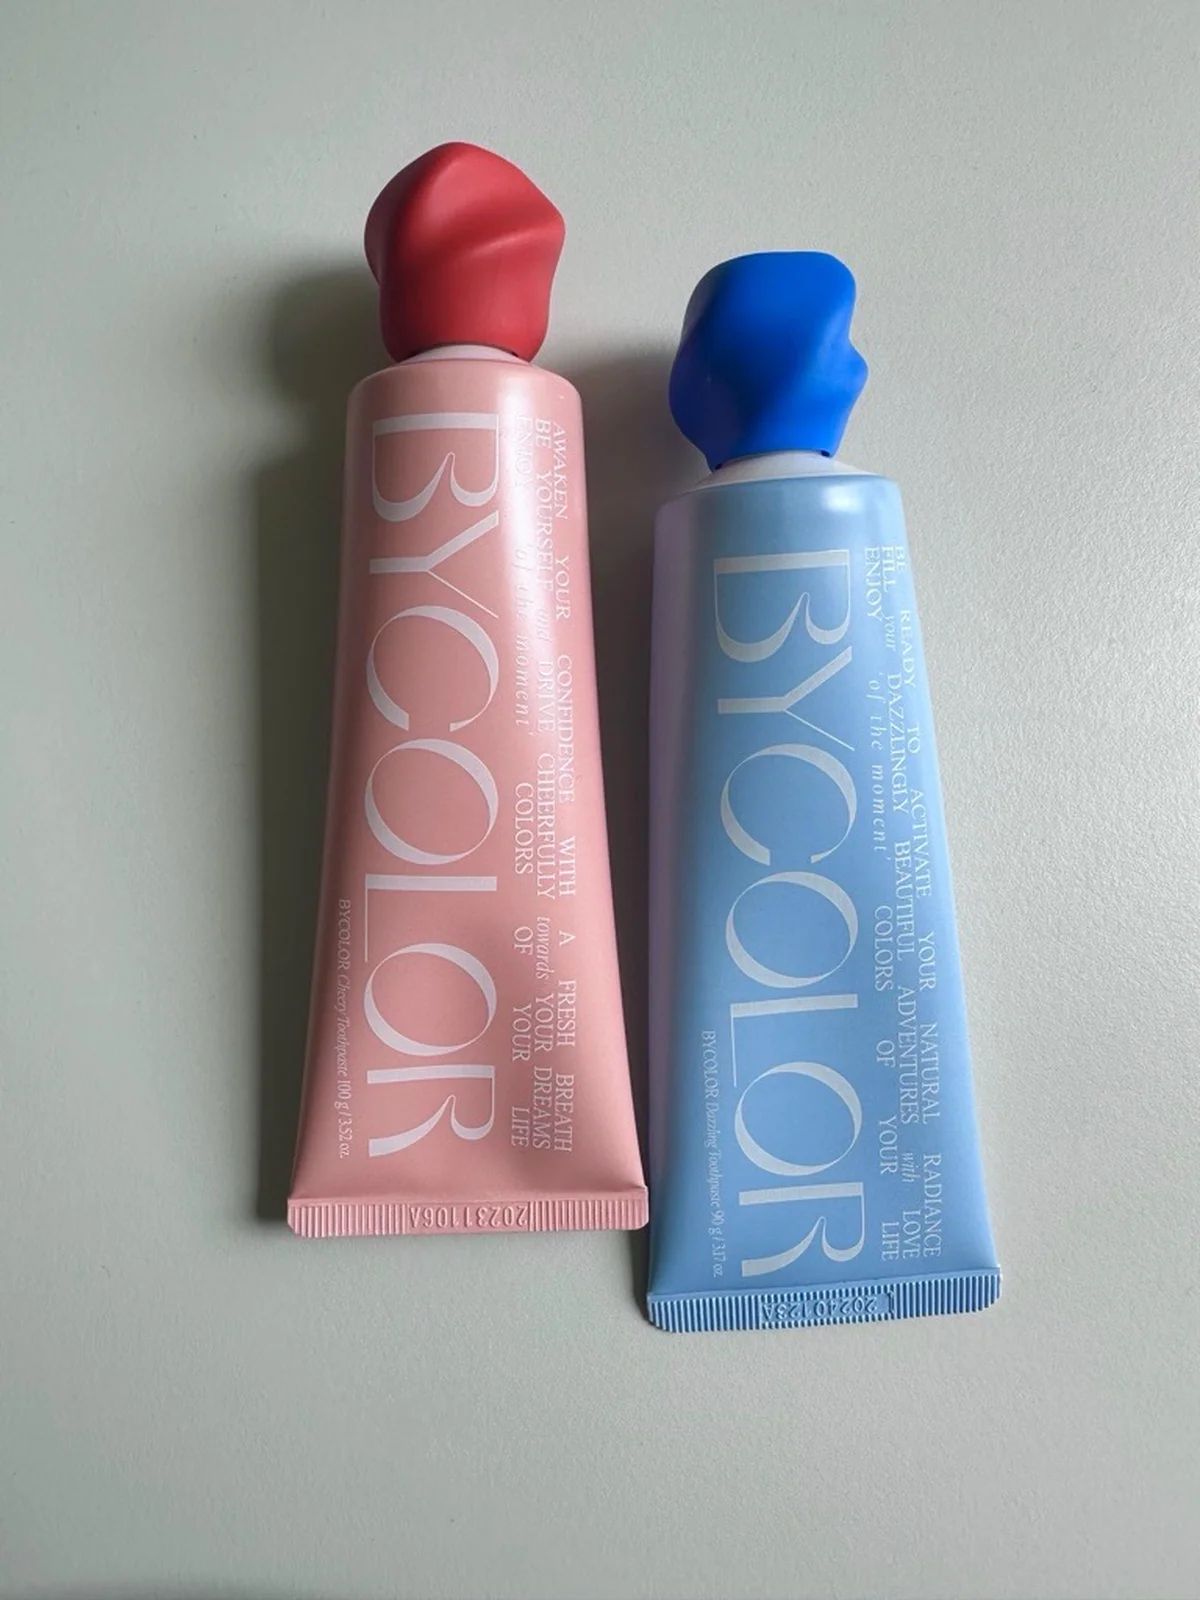 BYCOLOR TOOTHPASTE　DAZZLING(Blue) 　CHEERY(Red)